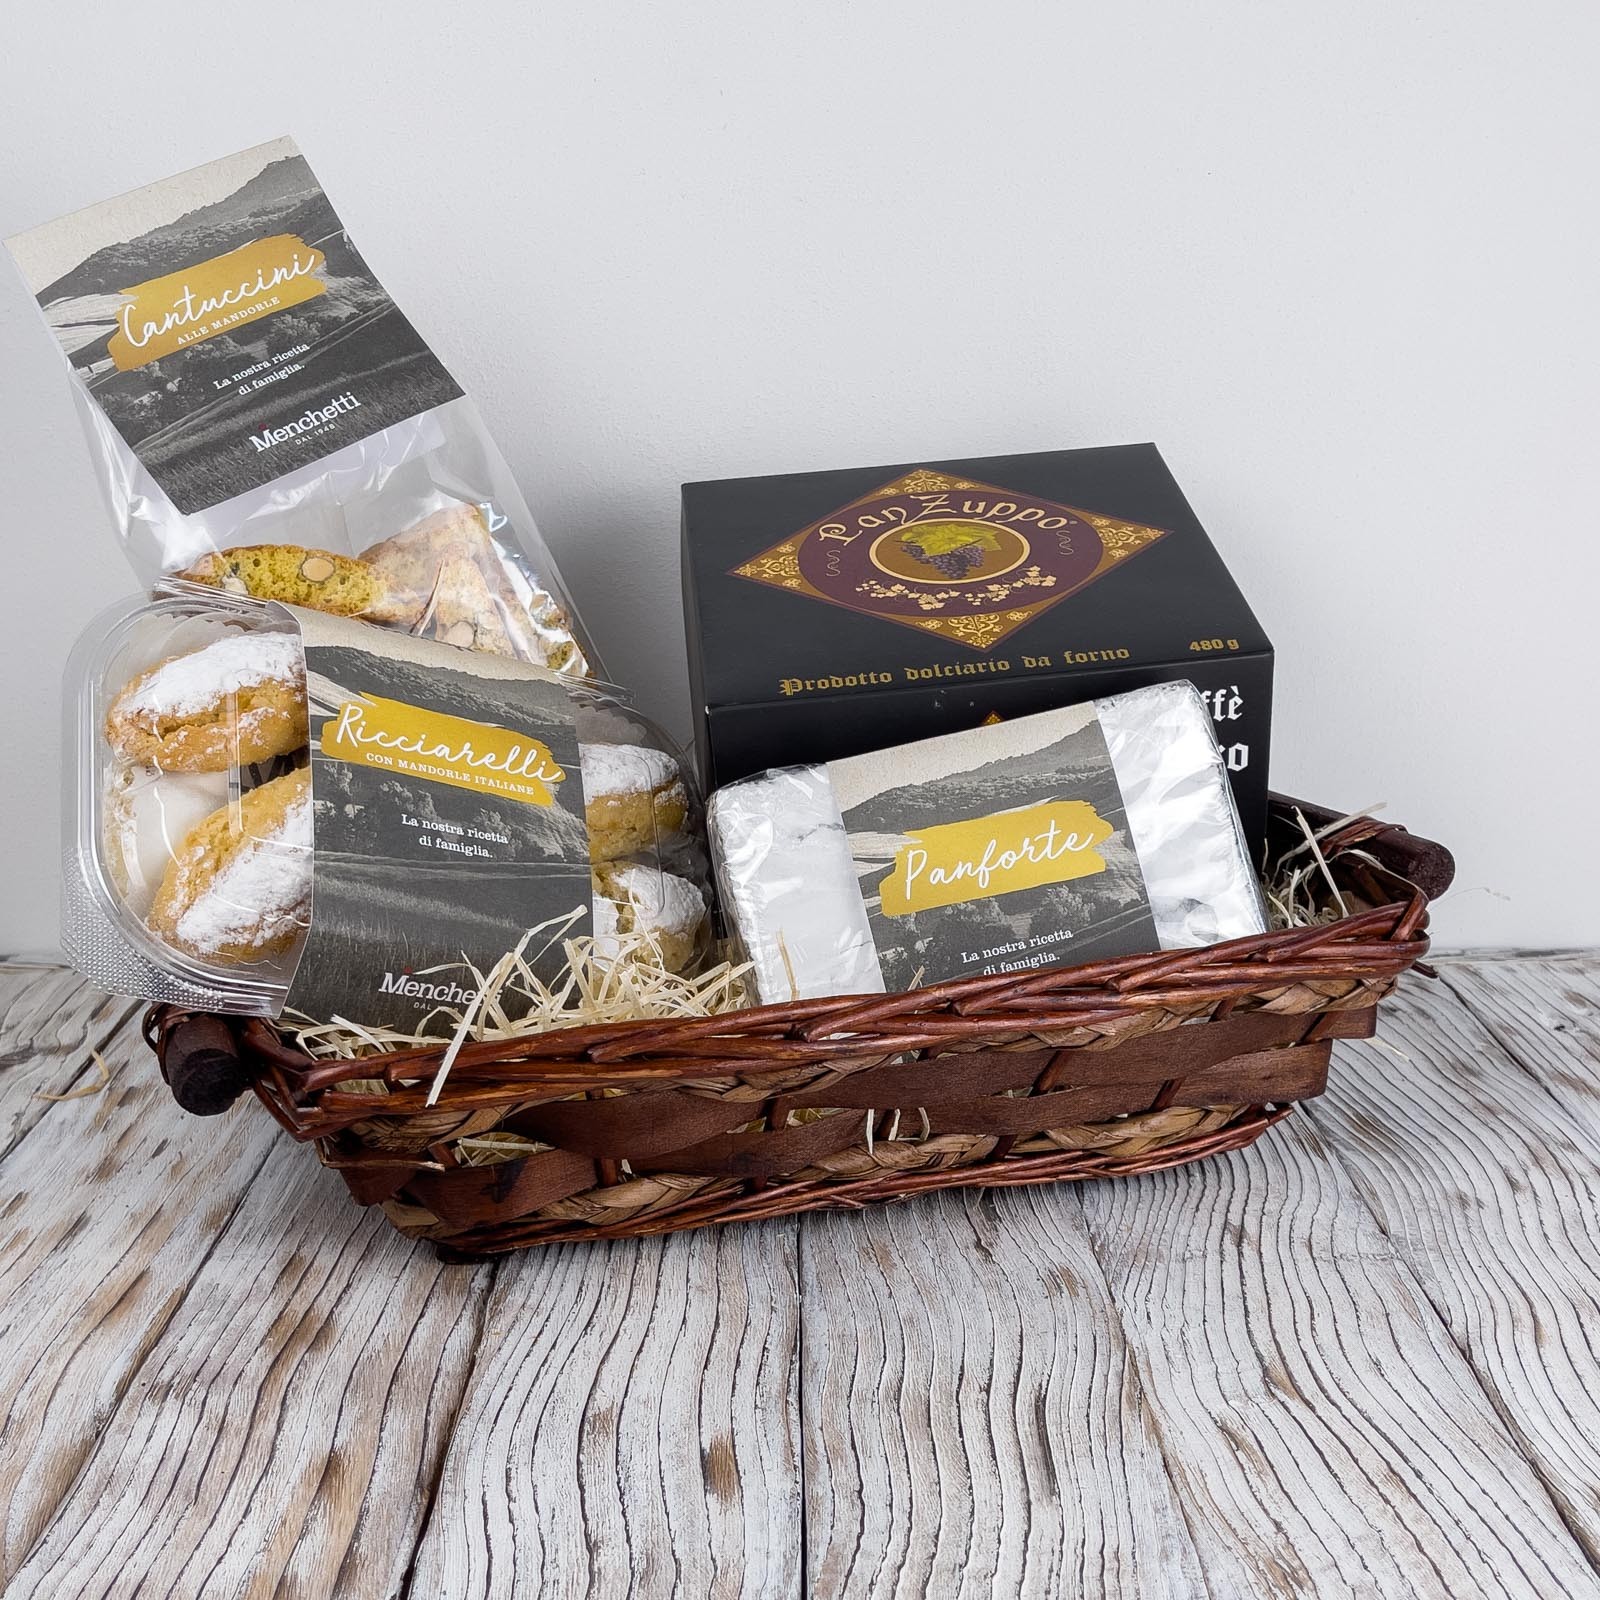 Gift Hamper consisting of a selection of 4 products for a total of about 1.5 kg. We will pack the basket and ship it wherever you want, there is also the possibility of adding a personalized card with a message.
For more information or product changes contact us in chat.